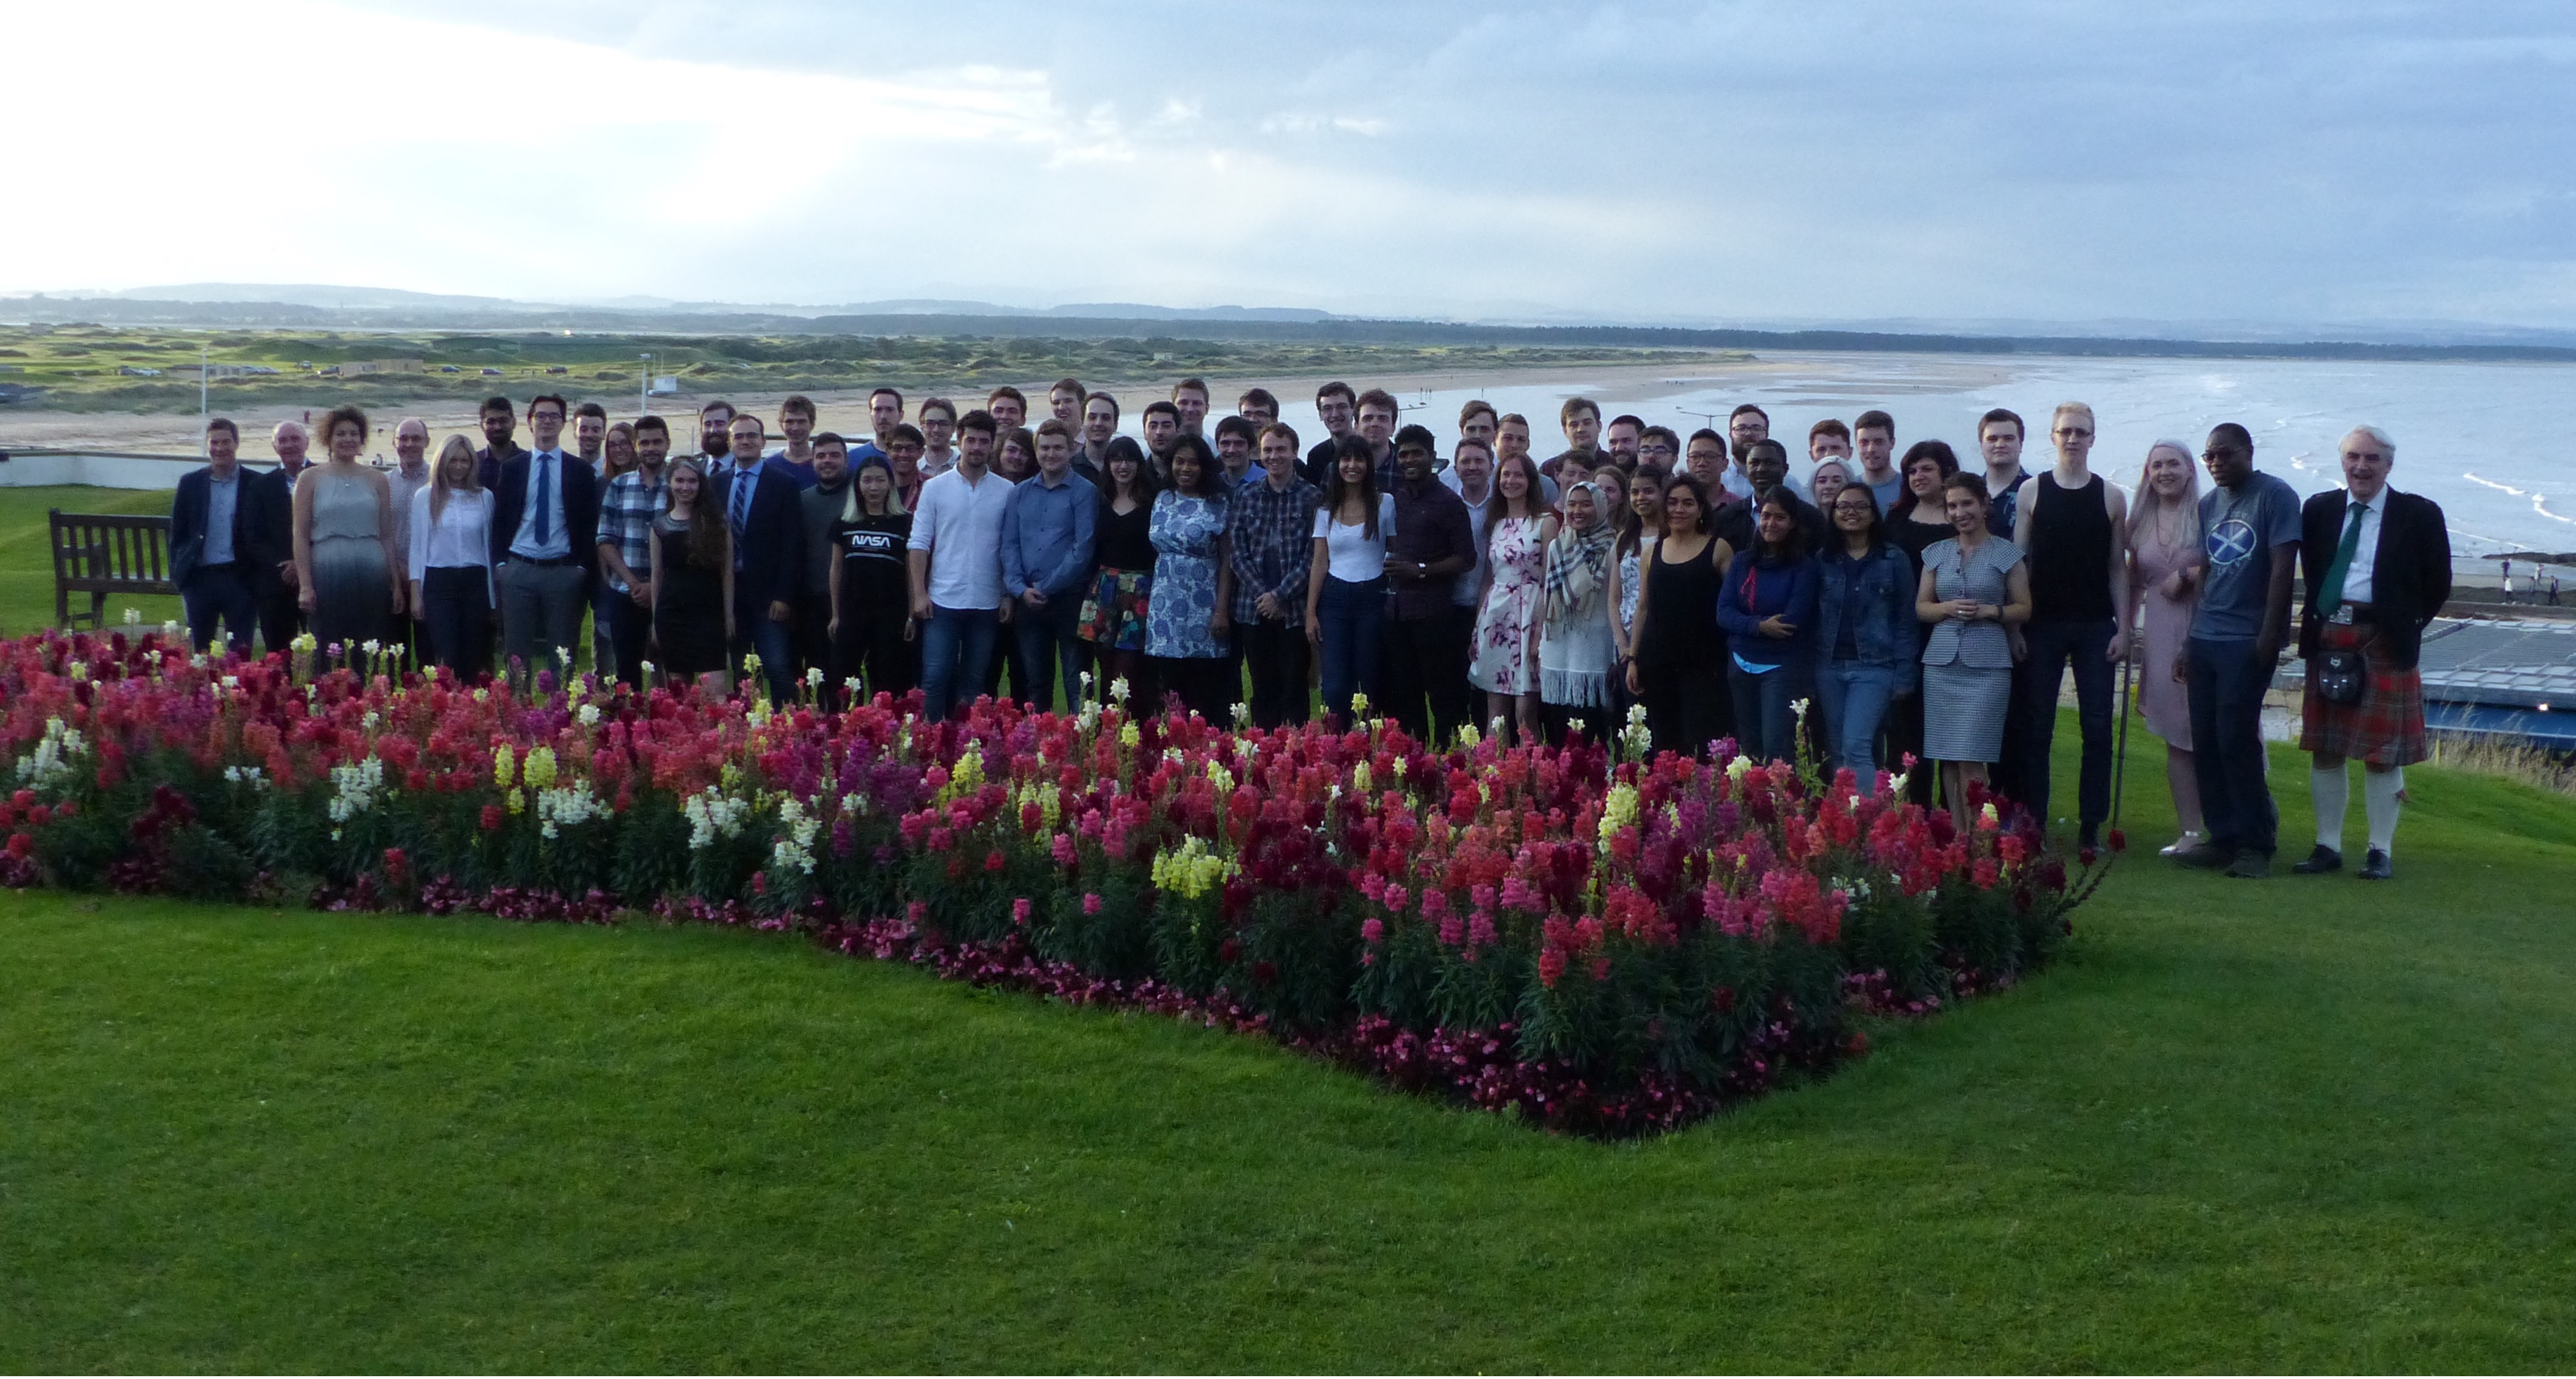 Group photo of attendees of SUSSP75 at St Andrews